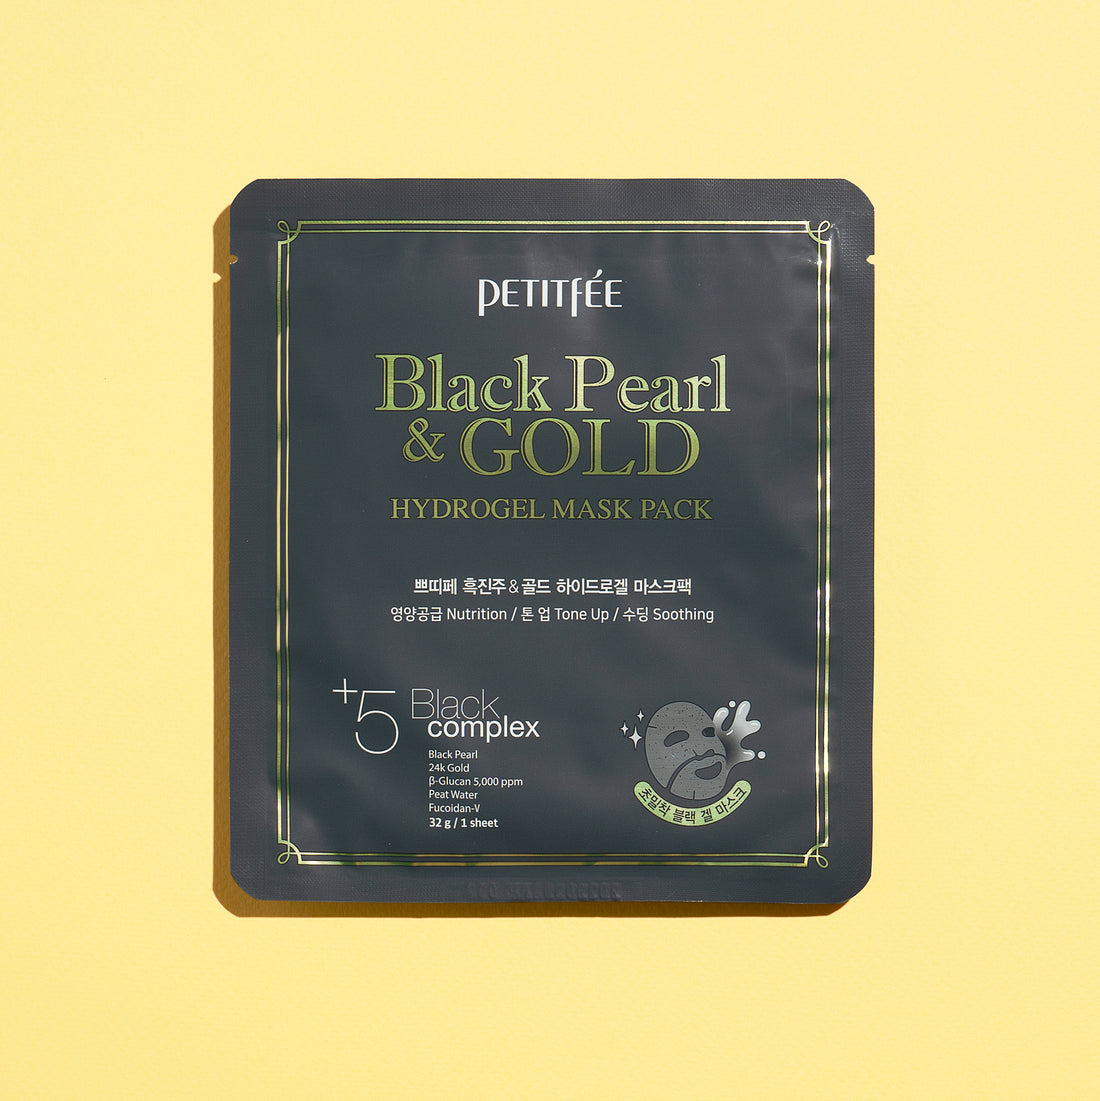 Black Pearl and Gold Hydrogel Mask Pack